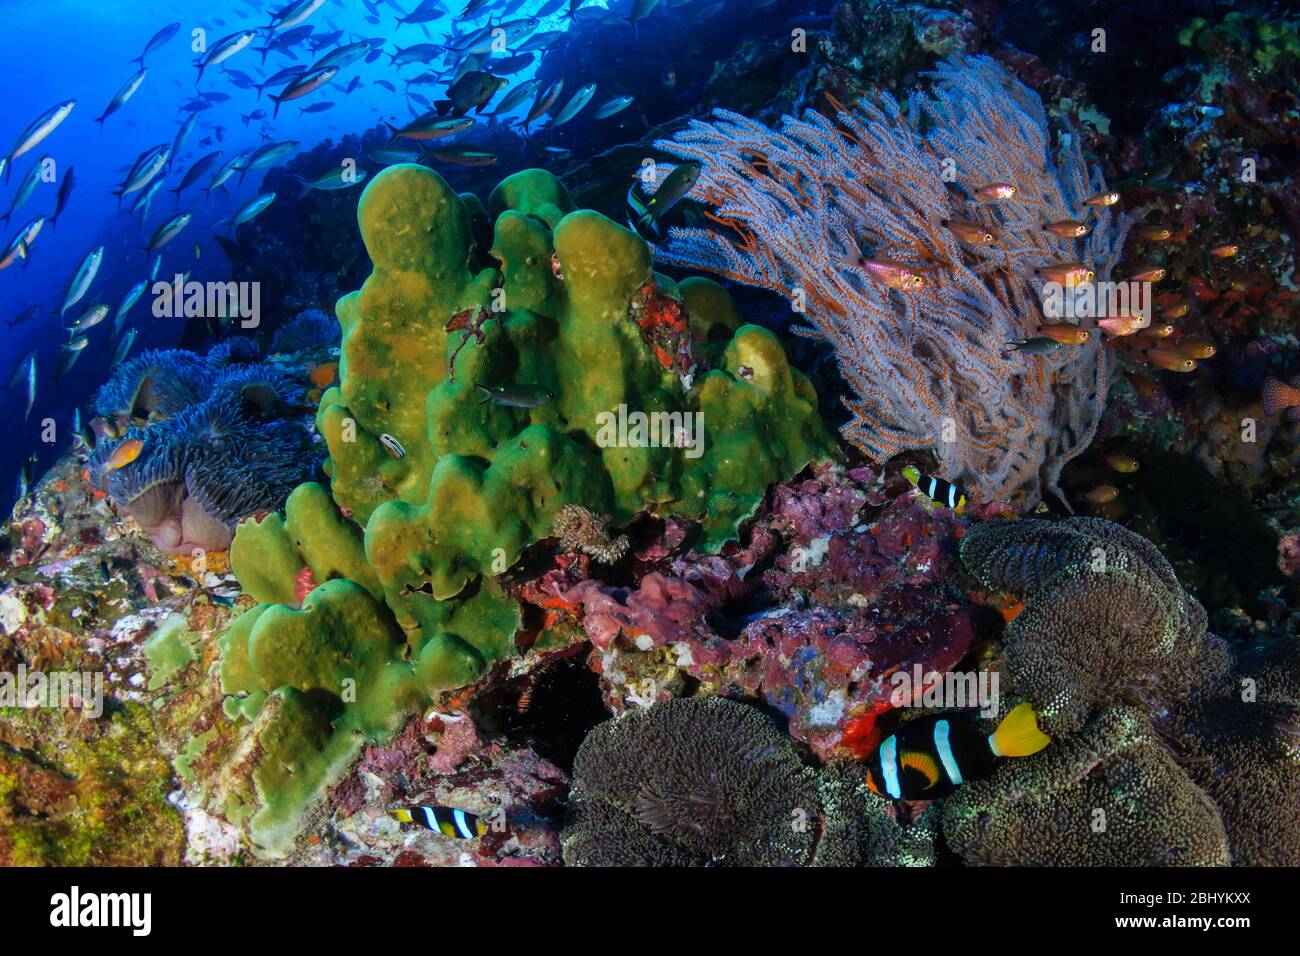 A family of cute Clownfish (Clark's Anemonefish) surrounded by tropical  fish on a healthy, colorful coral reef Stock Photo - Alamy